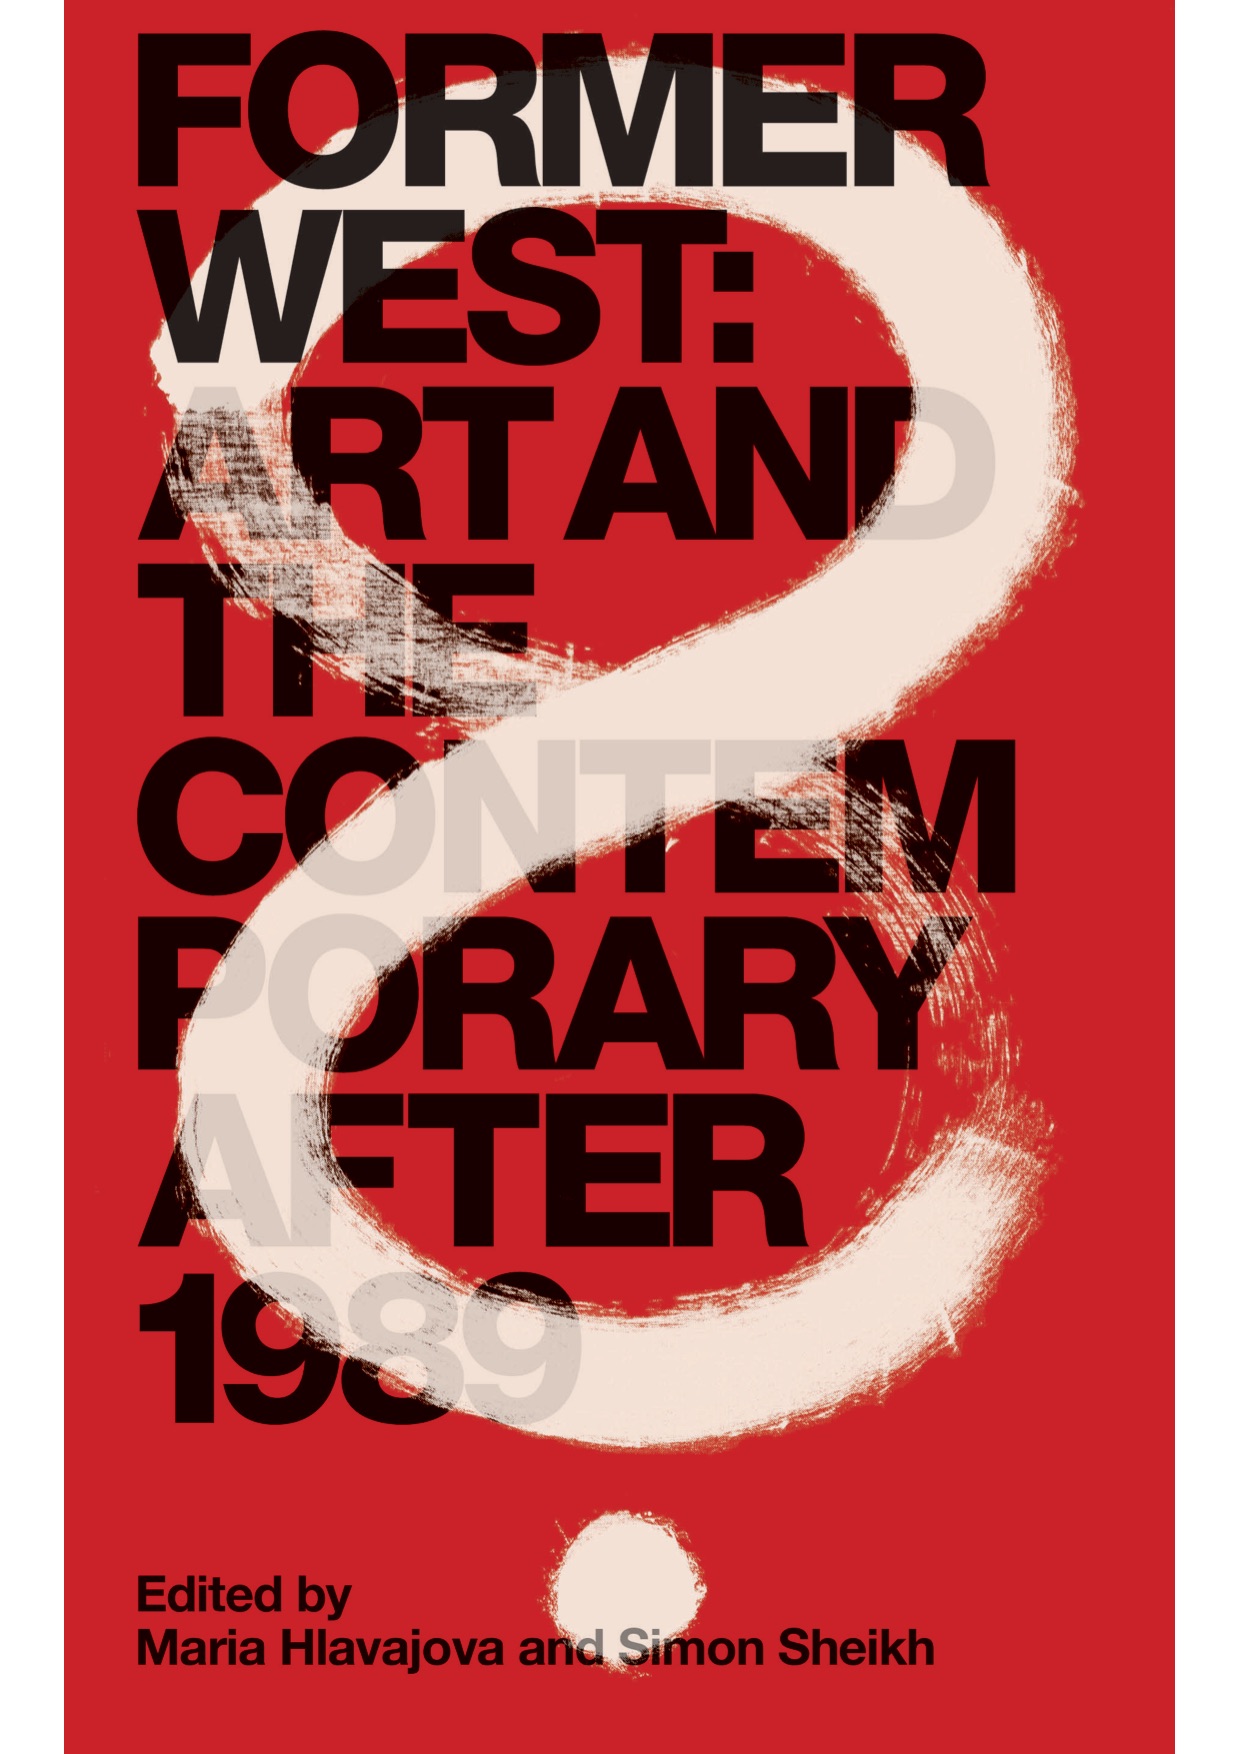 formerwest_cover.jpg